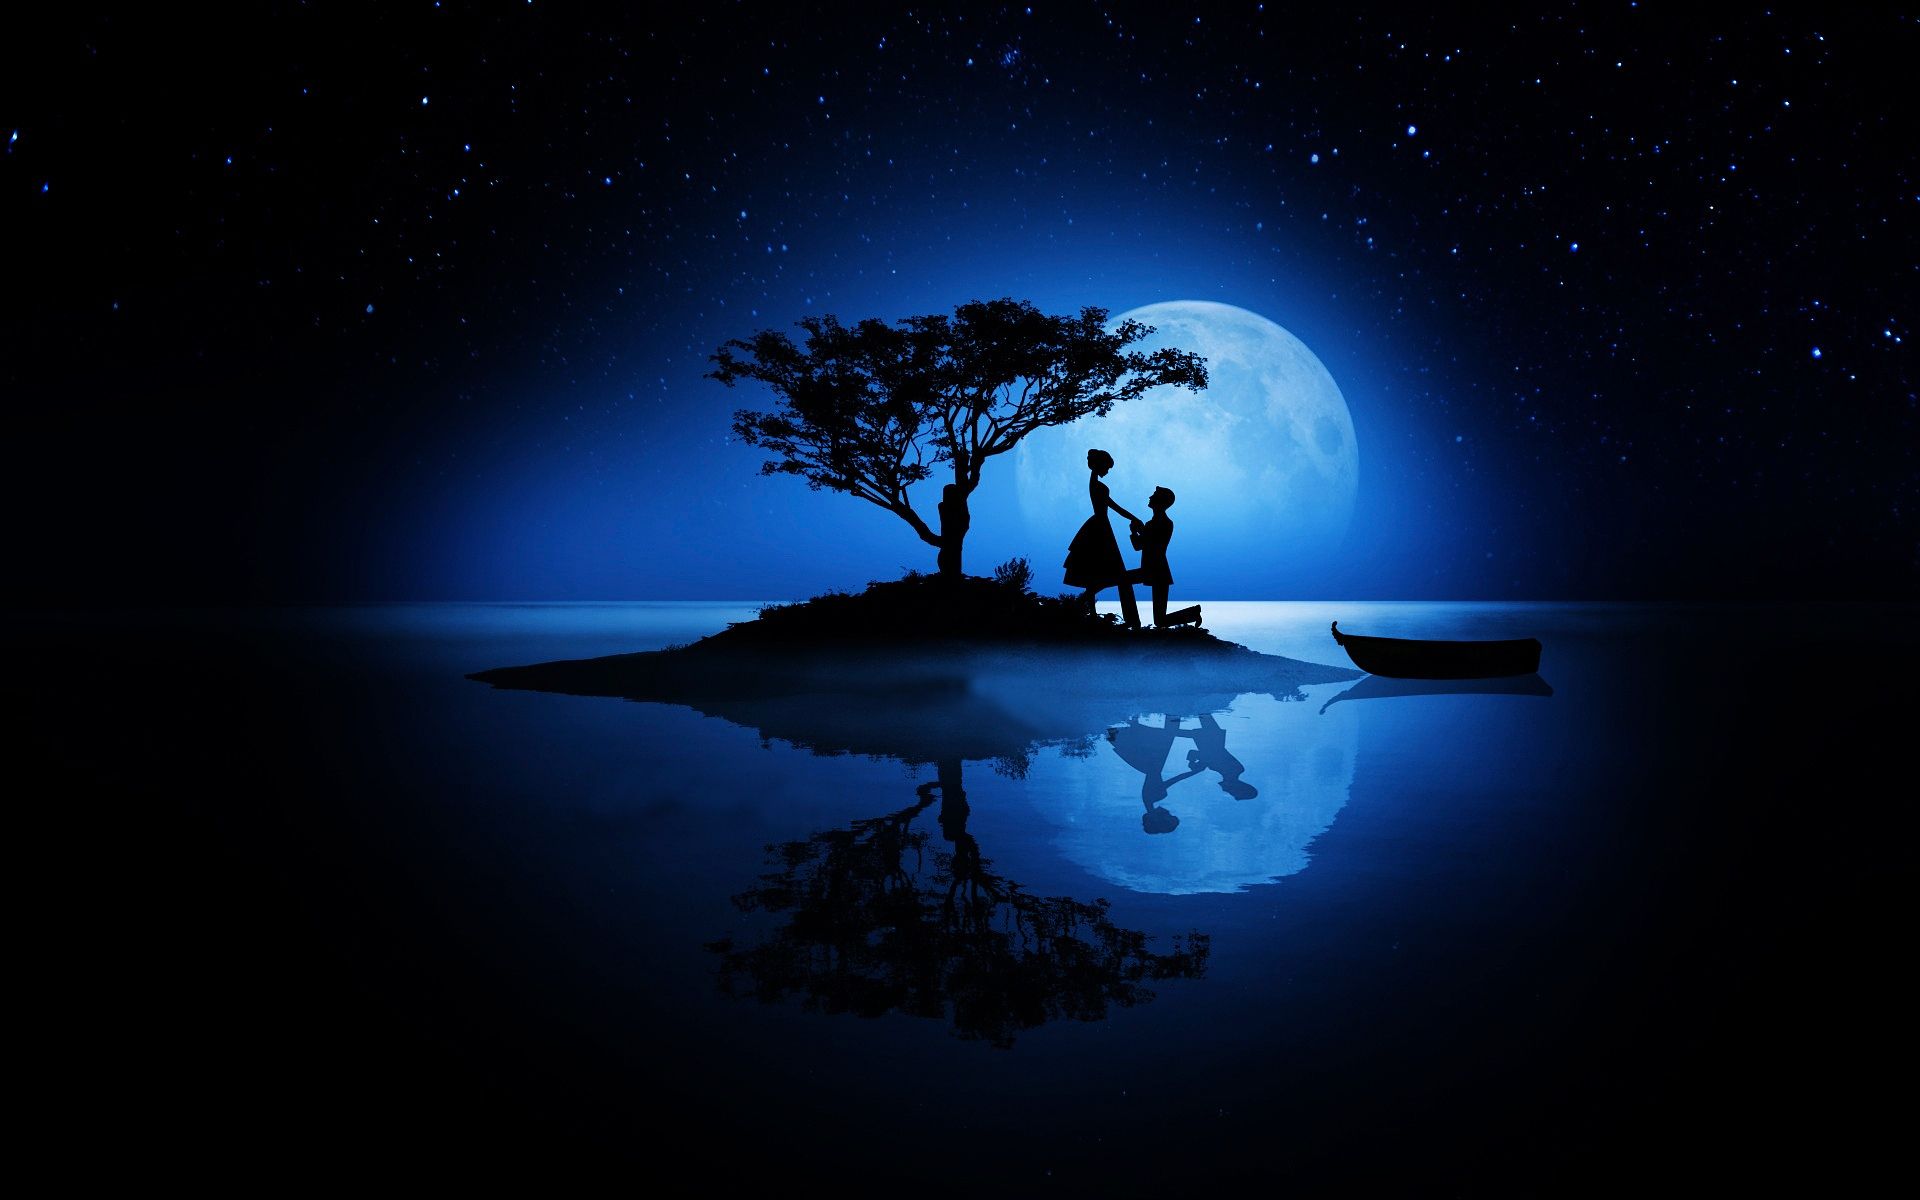 Download wallpaper love, night, the moon, romance, stars, pair, silhouettes, Valentine's day, section mood in resolution 1920x1200